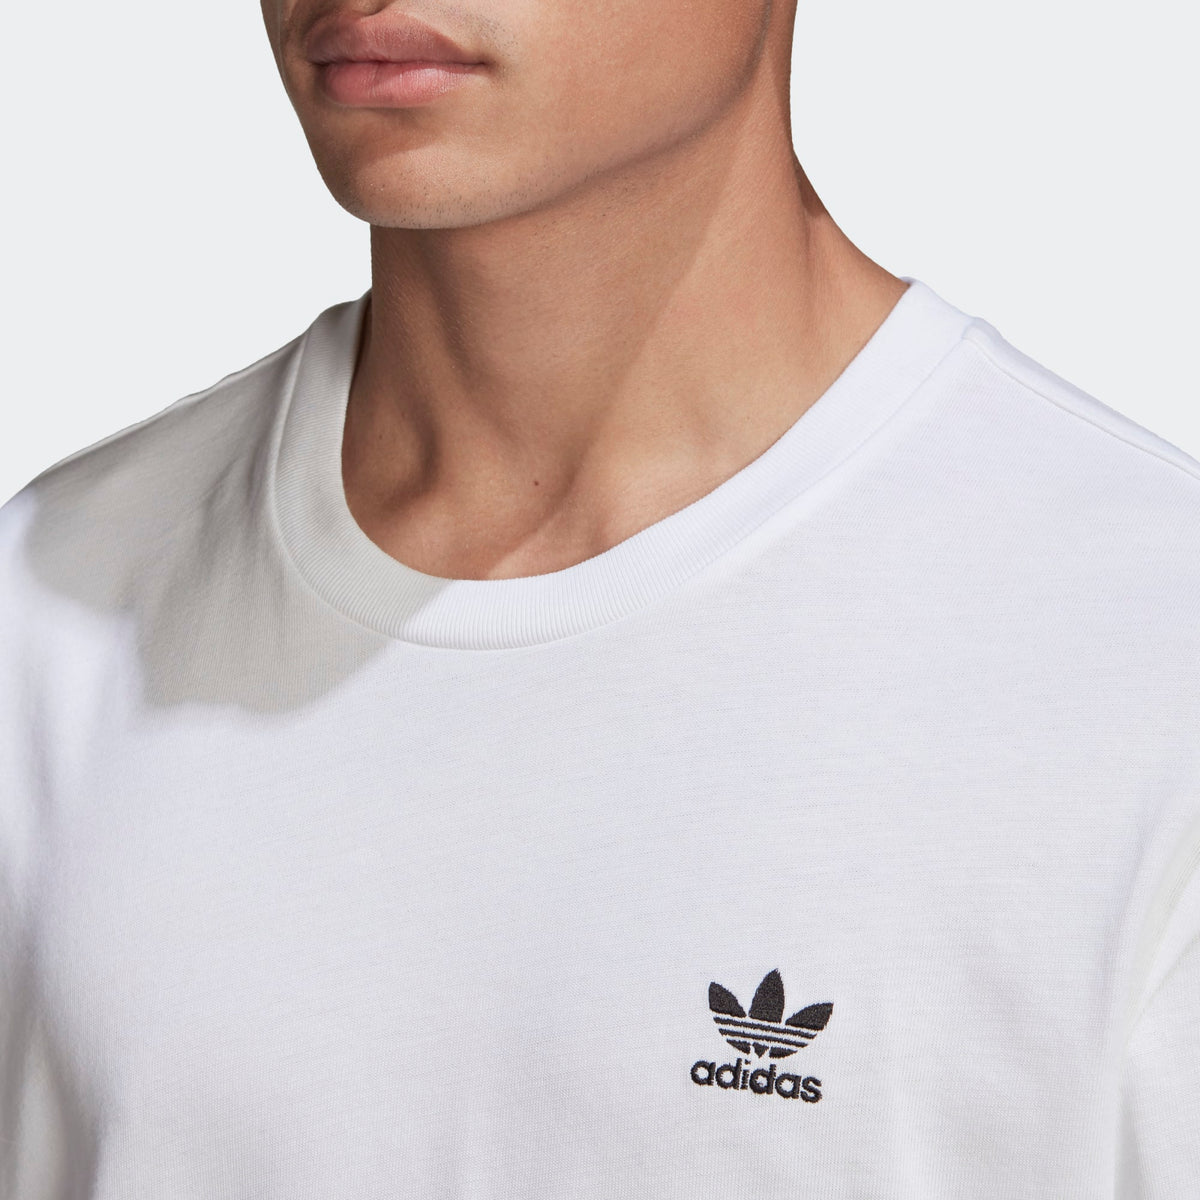 Merch PH Classics Adicolor Trilogy Logo Tee – Adidas Boxy Embroidered (White)(GN3453)